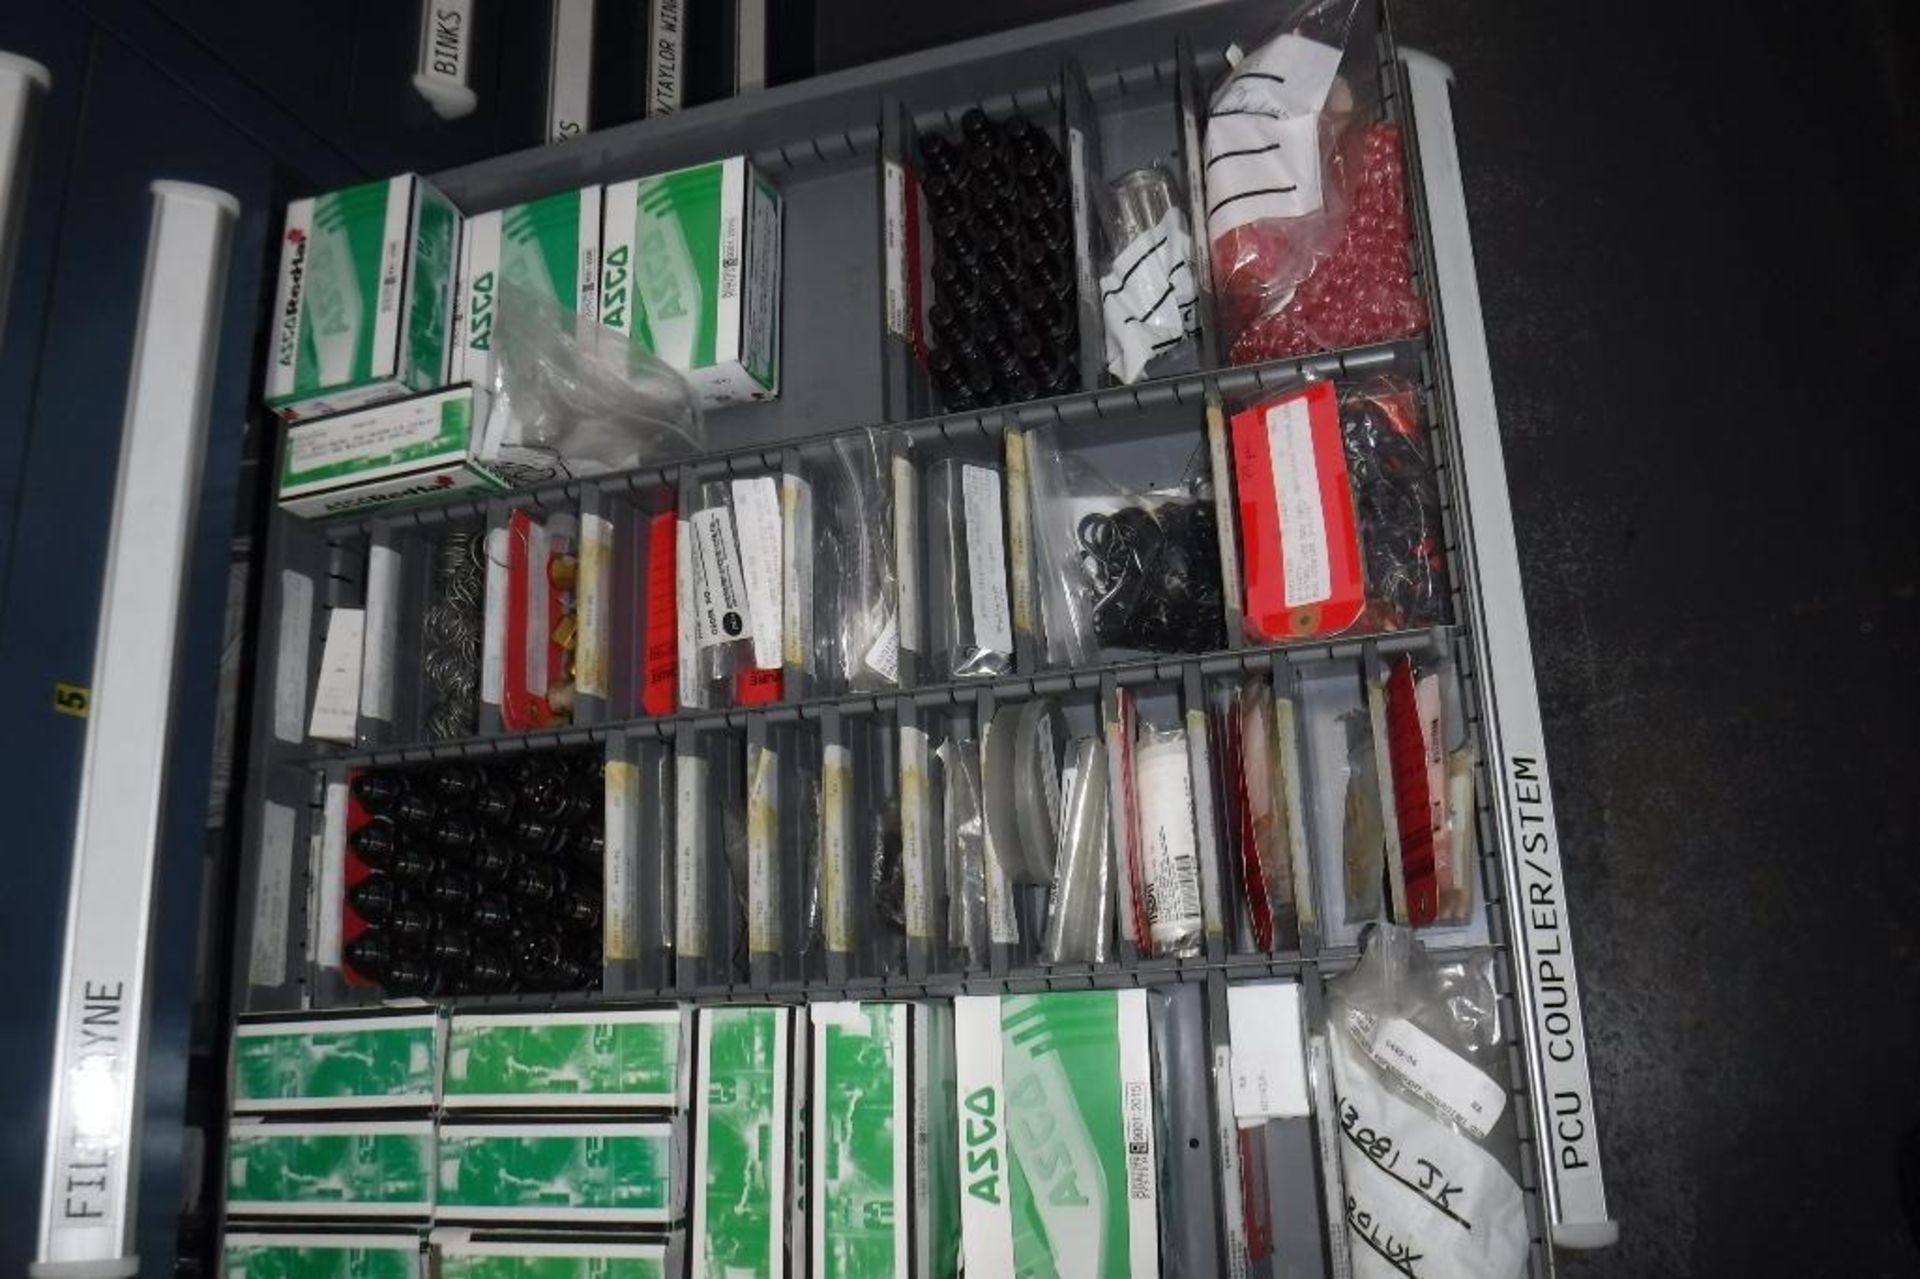 10-Drawer Vidmar Cabinet with Contents-Swage Locks, Loc-Line, Charger, Filterdyne, PCU Coupler, Vari - Image 6 of 15